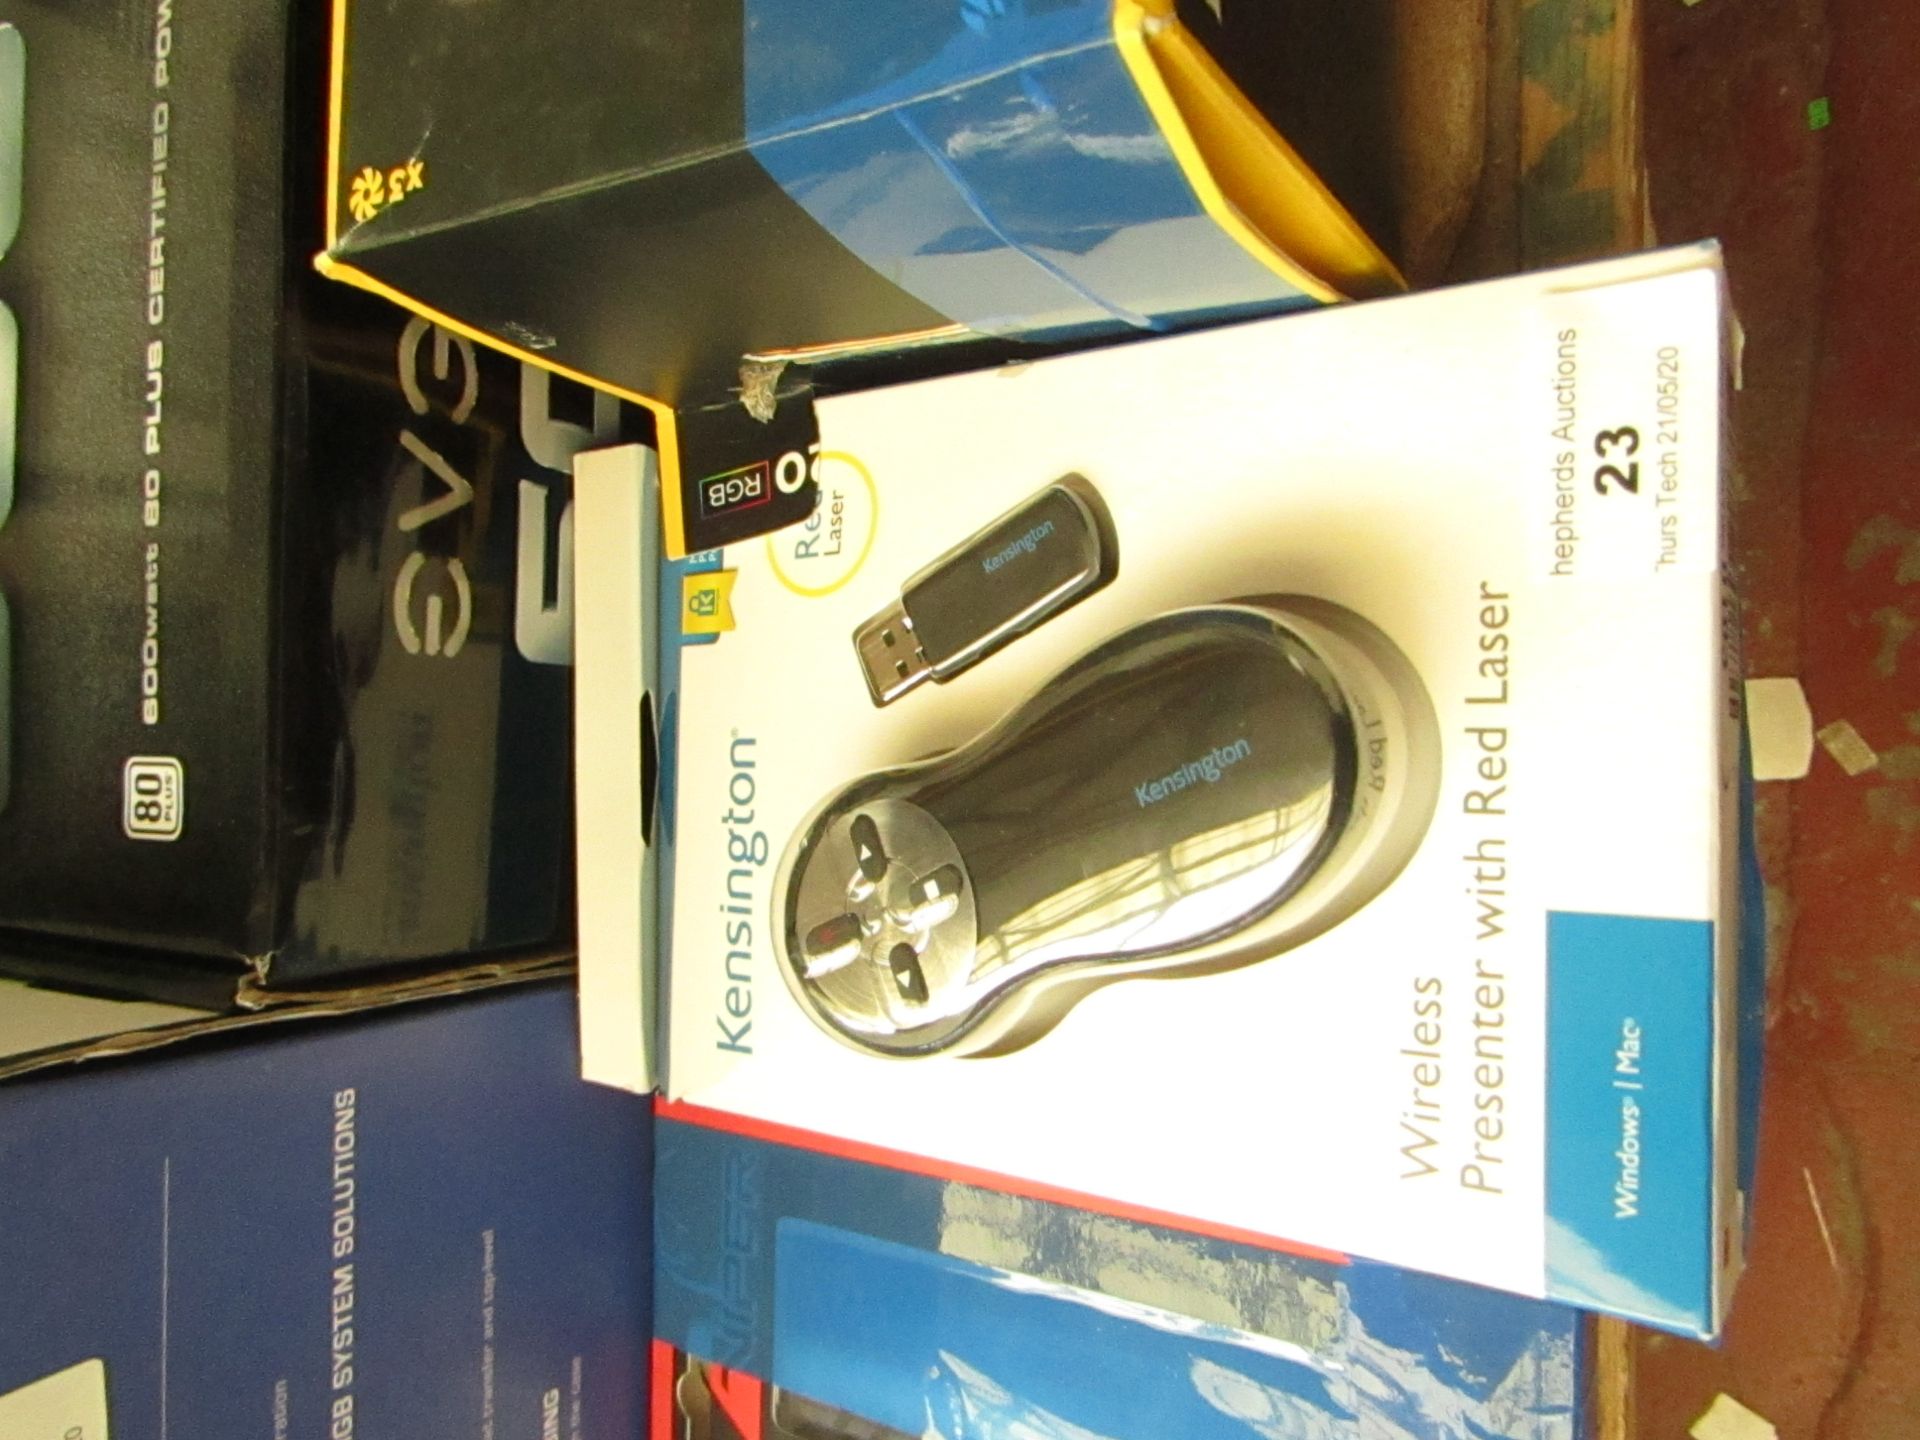 Kensington wireless presenter with red laser, untested and boxed.